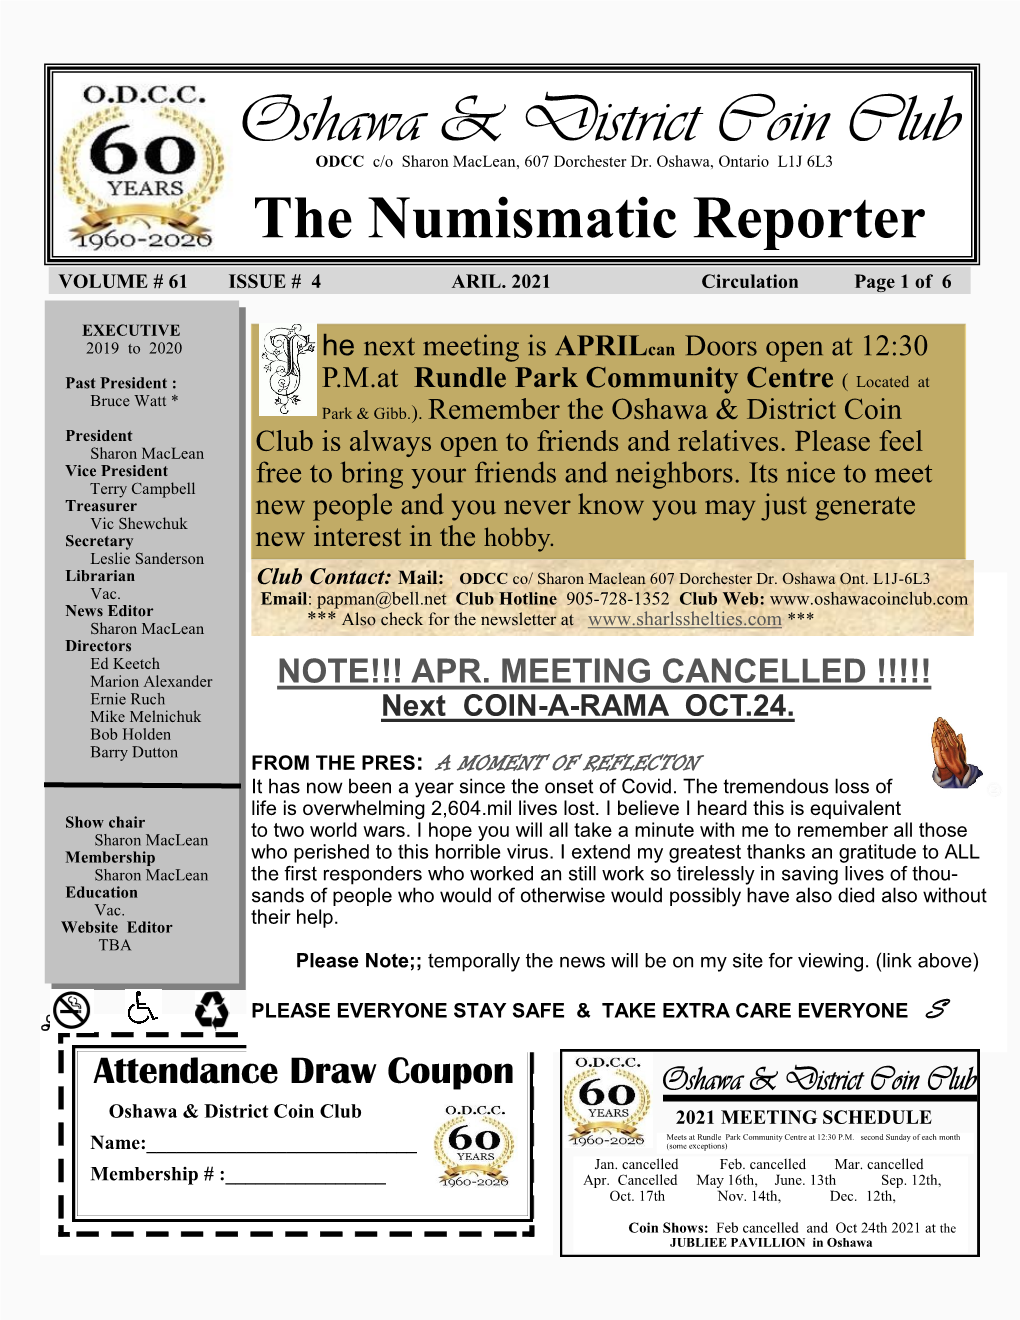 The Numismatic Reporter